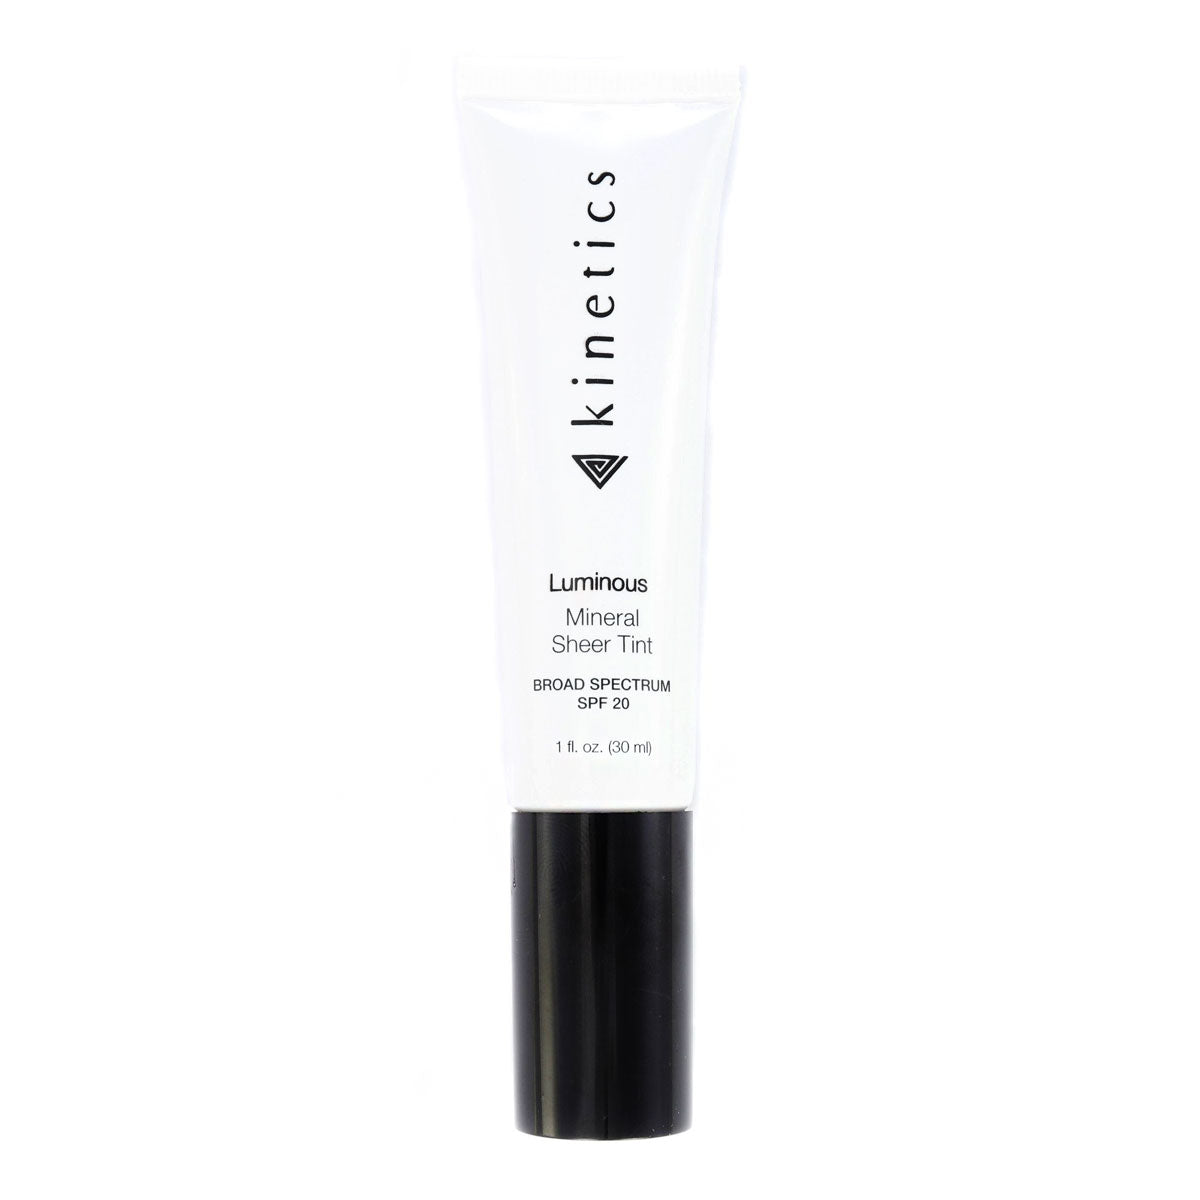 Fruit pigmented tinted moisturizer with SPF20 (sheer to medium